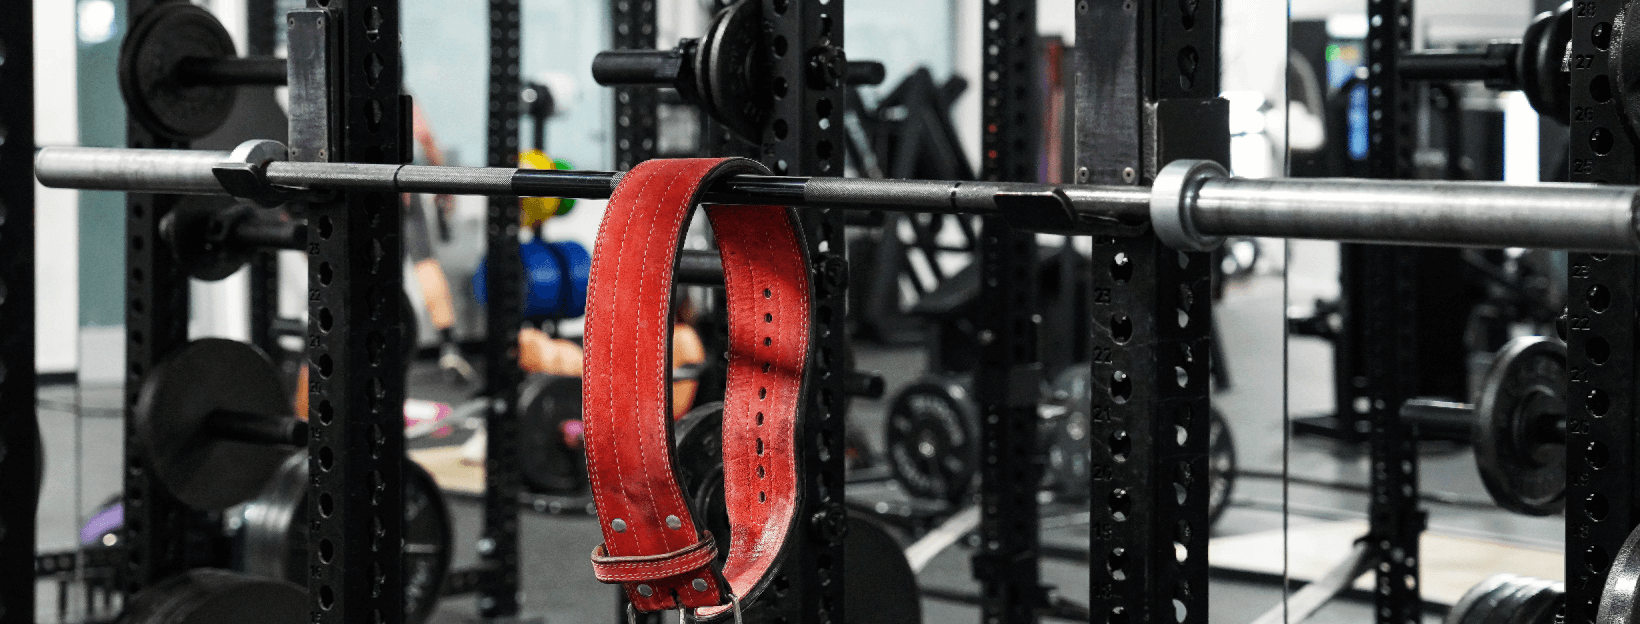 Weightlifting belts explained - Yahoo Sports